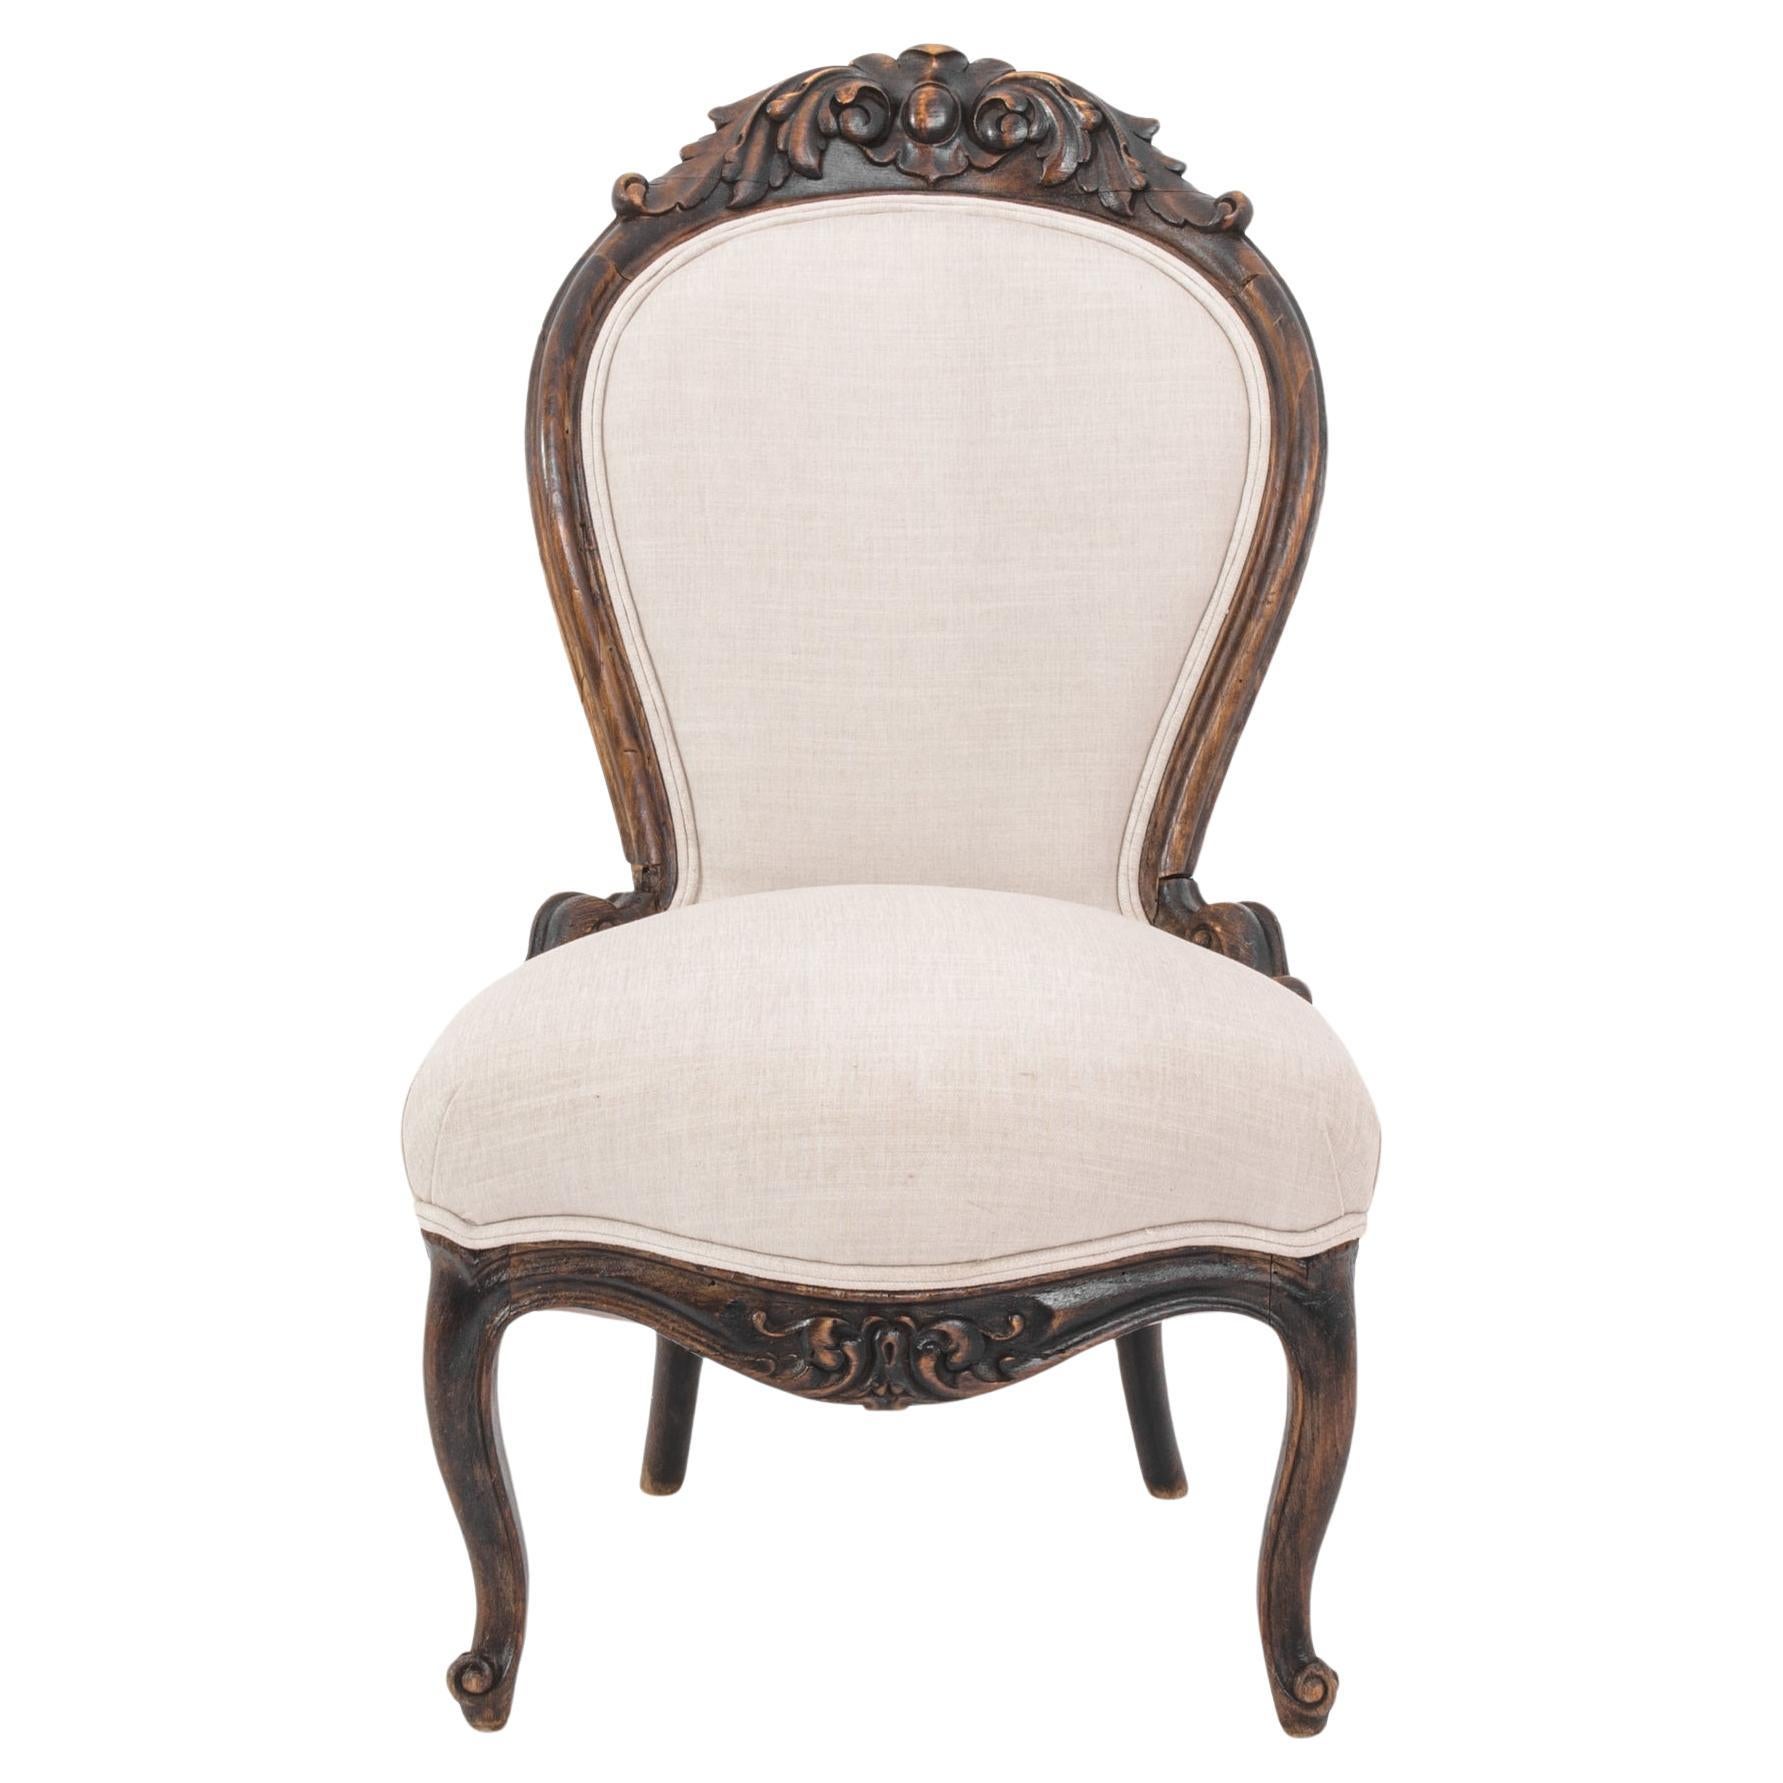 1880s French Wooden Chair with Upholstered Seat and Back